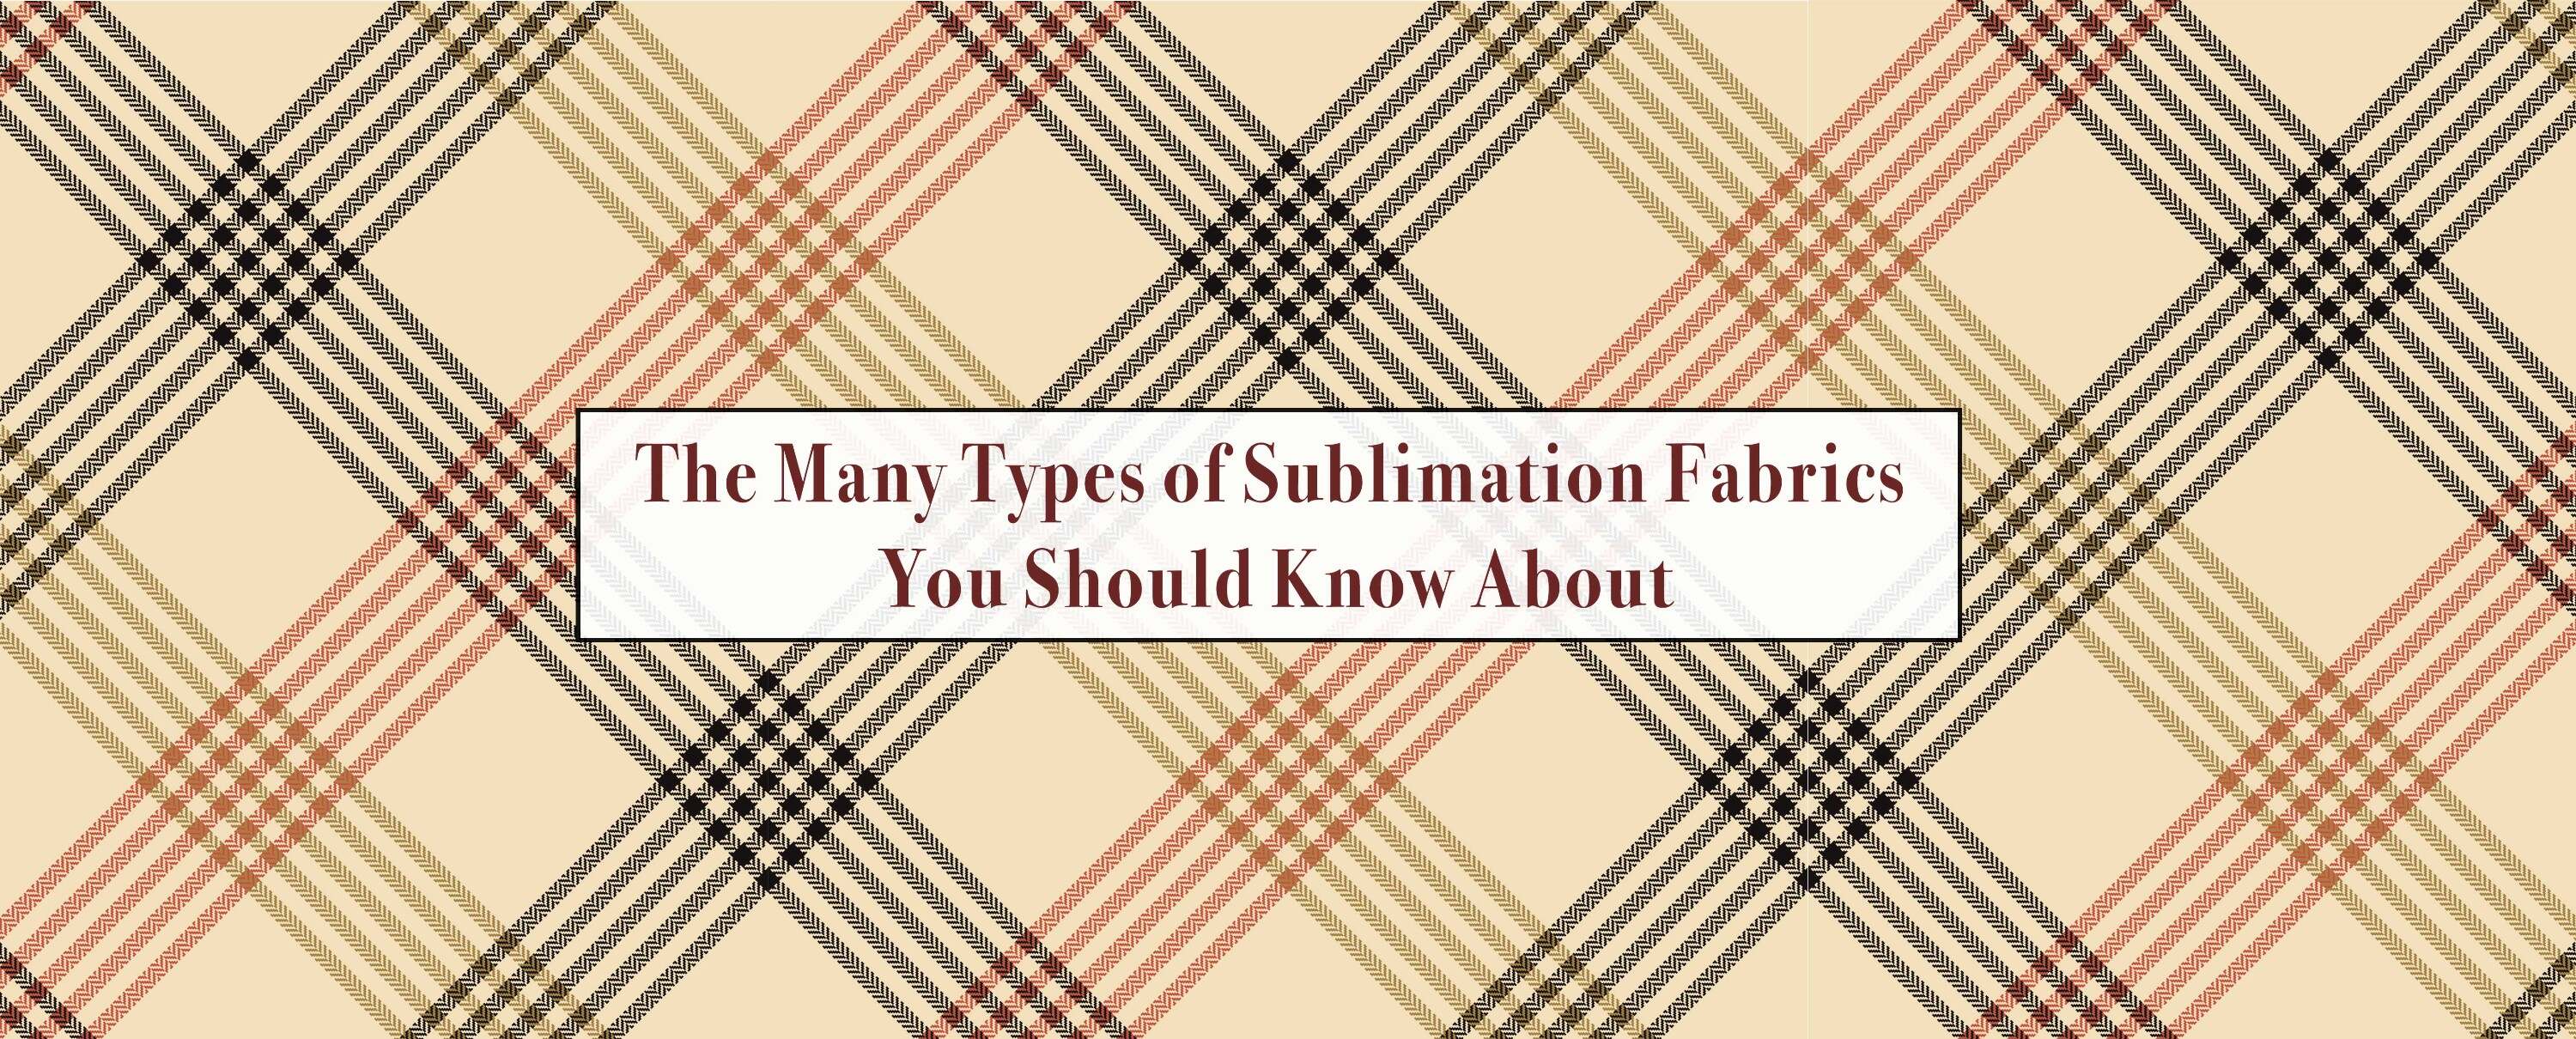 The Many Types of Sublimation Fabrics You Should Know About